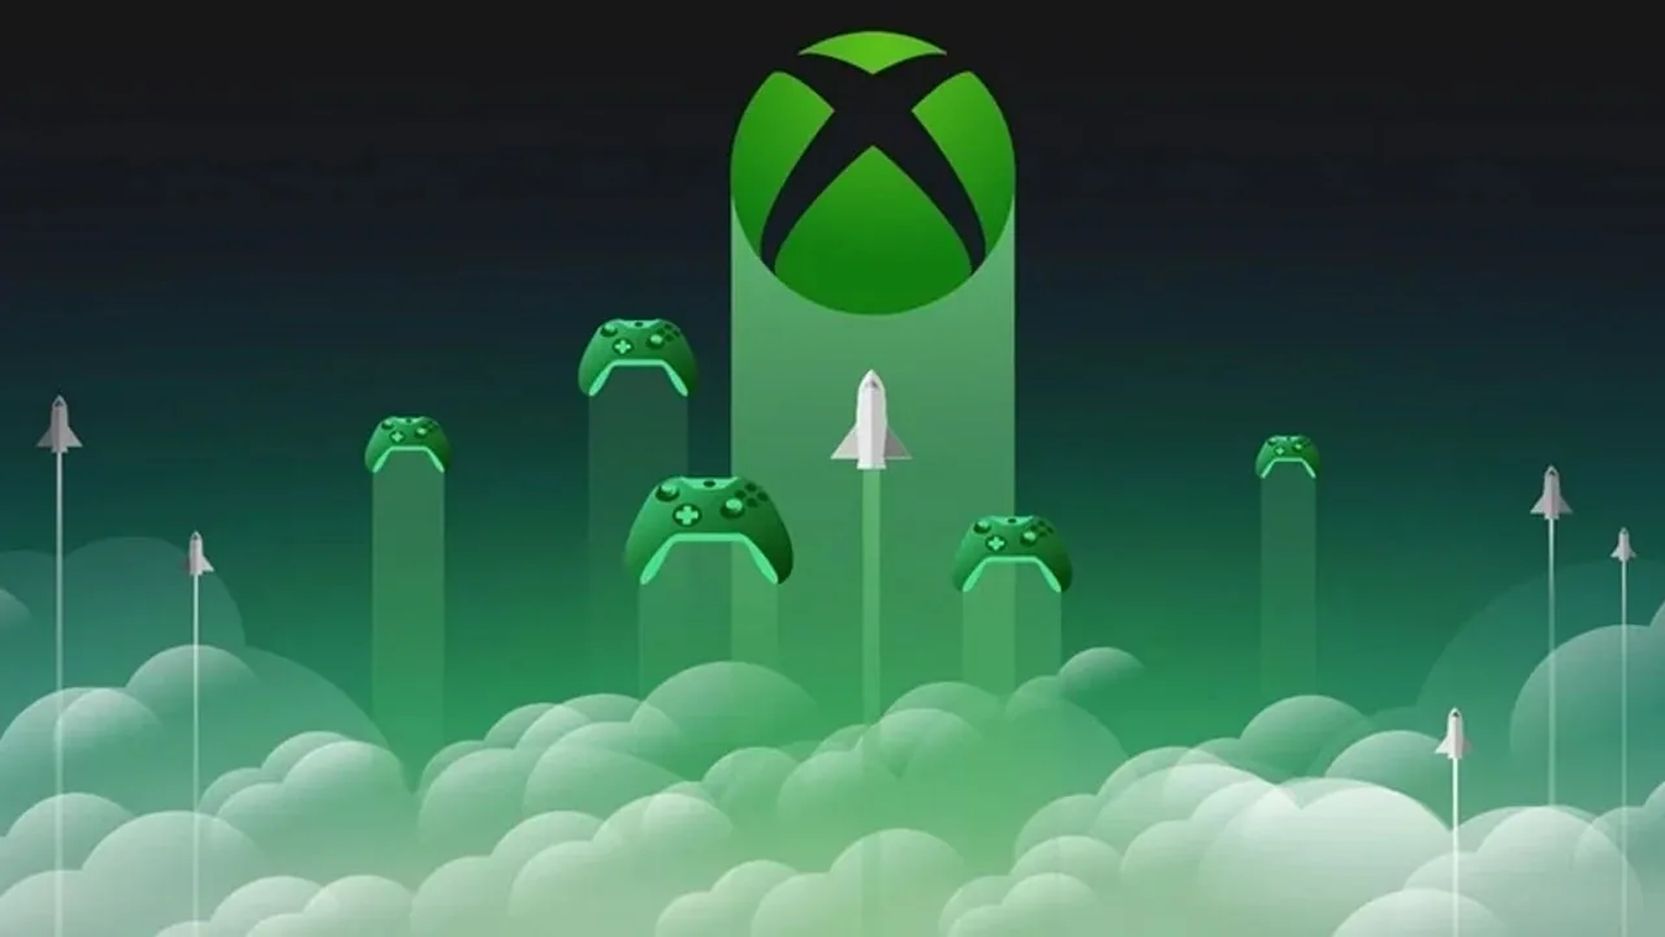 Image for Xbox cloud games can now be launched via Bing and Microsoft Edge